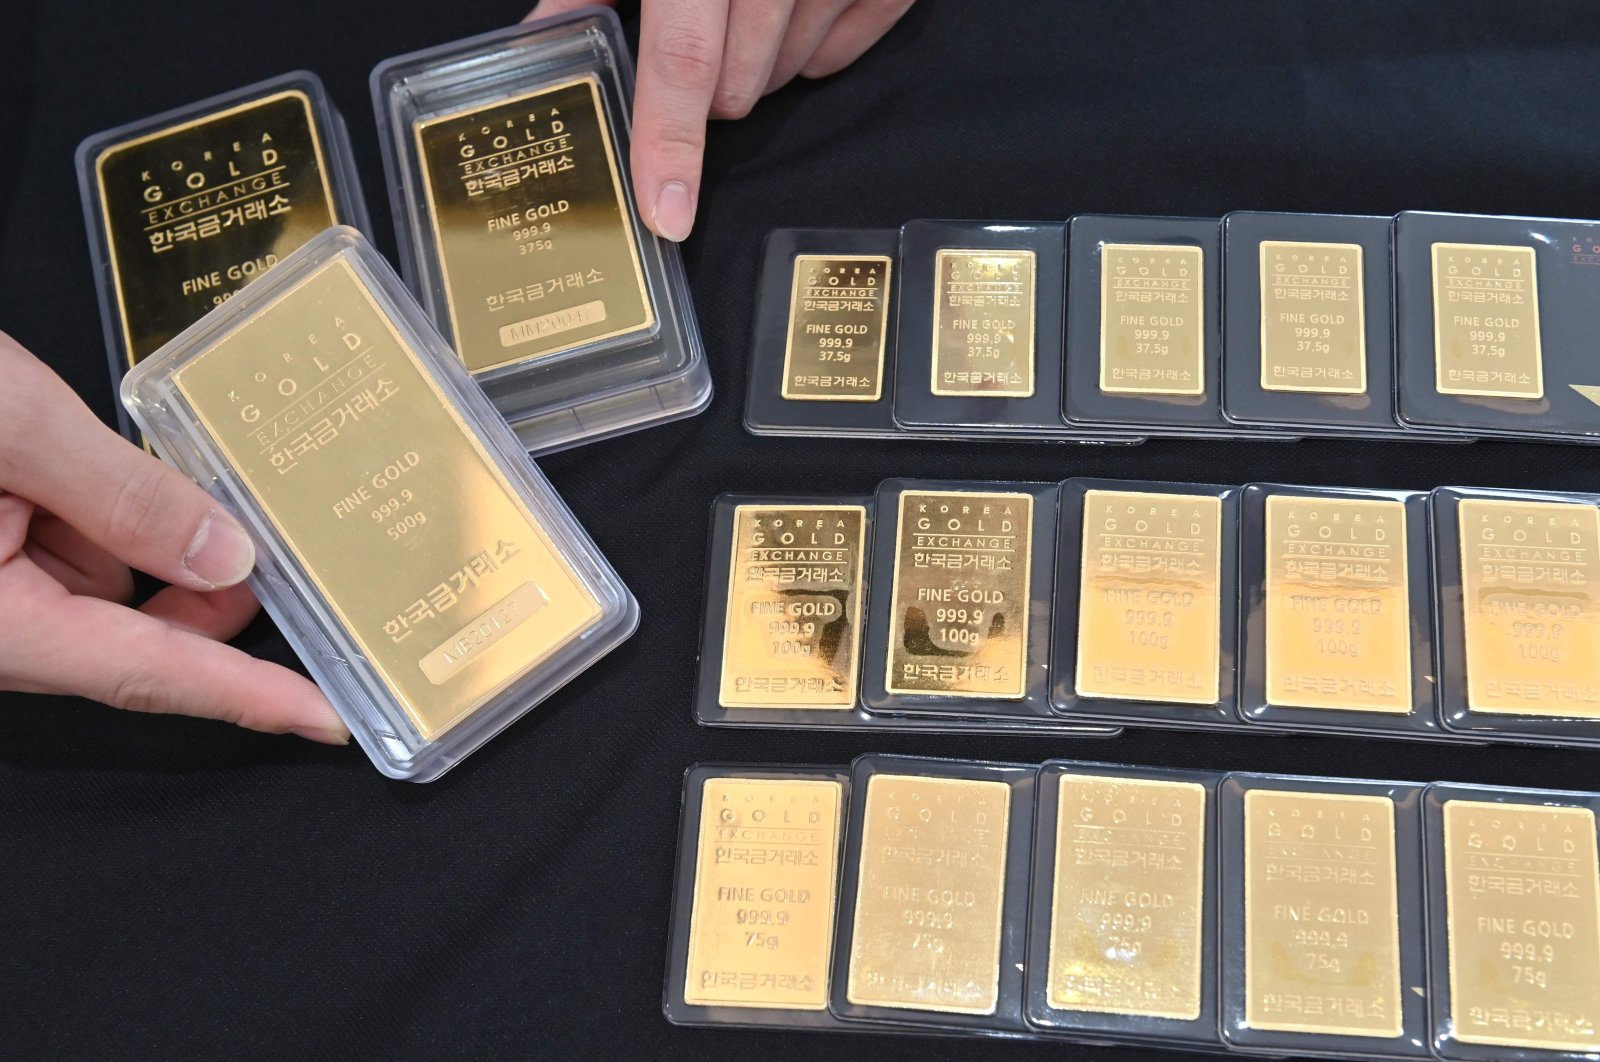 An employee displays gold bars at a Korea Gold Exchange shop in Seoul, South Korea on July 30, 2020. (AFP Photo)